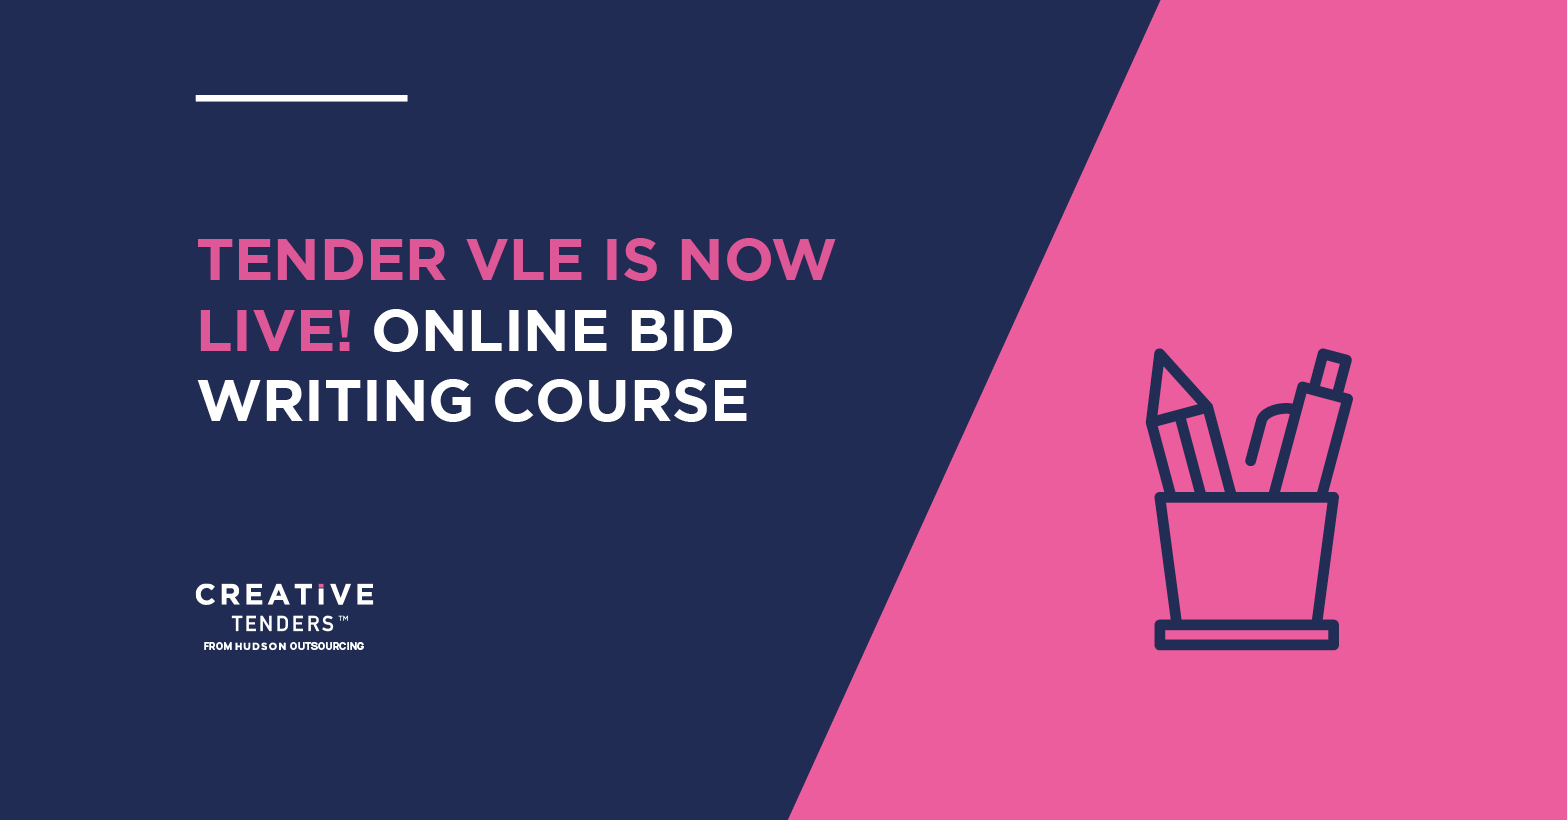 TENDER VLE IS NOW LIVE! – ONLINE BID WRITING COURSE